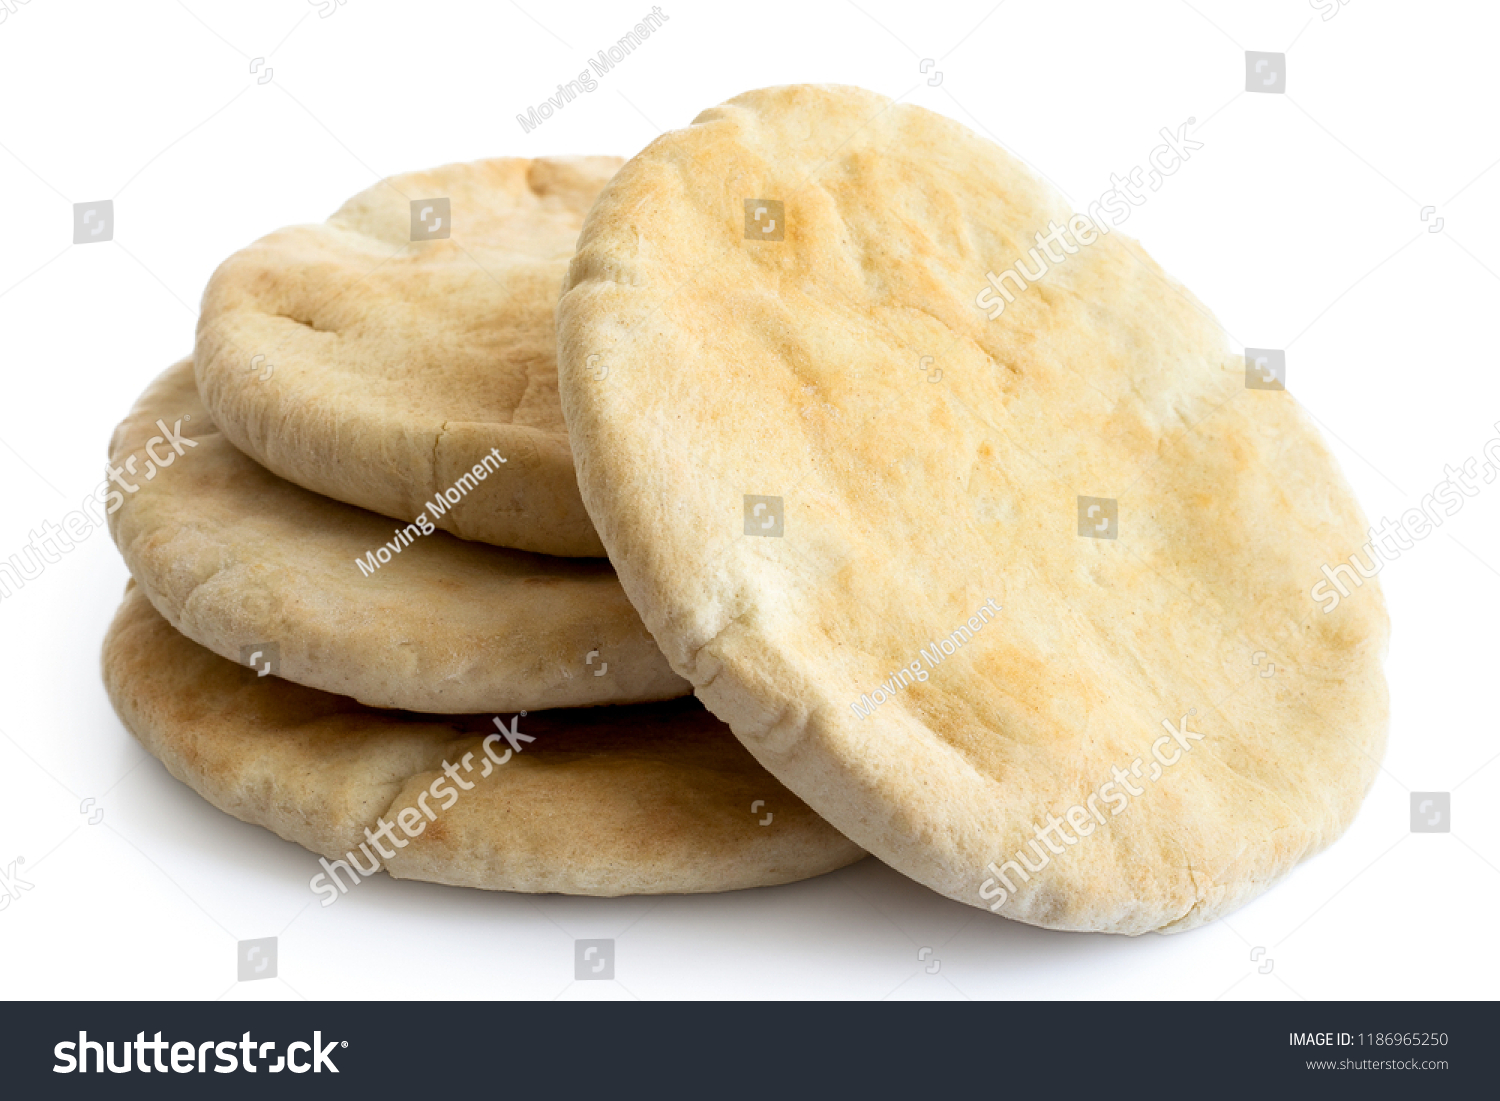 A stack of pita breads isolated on white from above. #1186965250